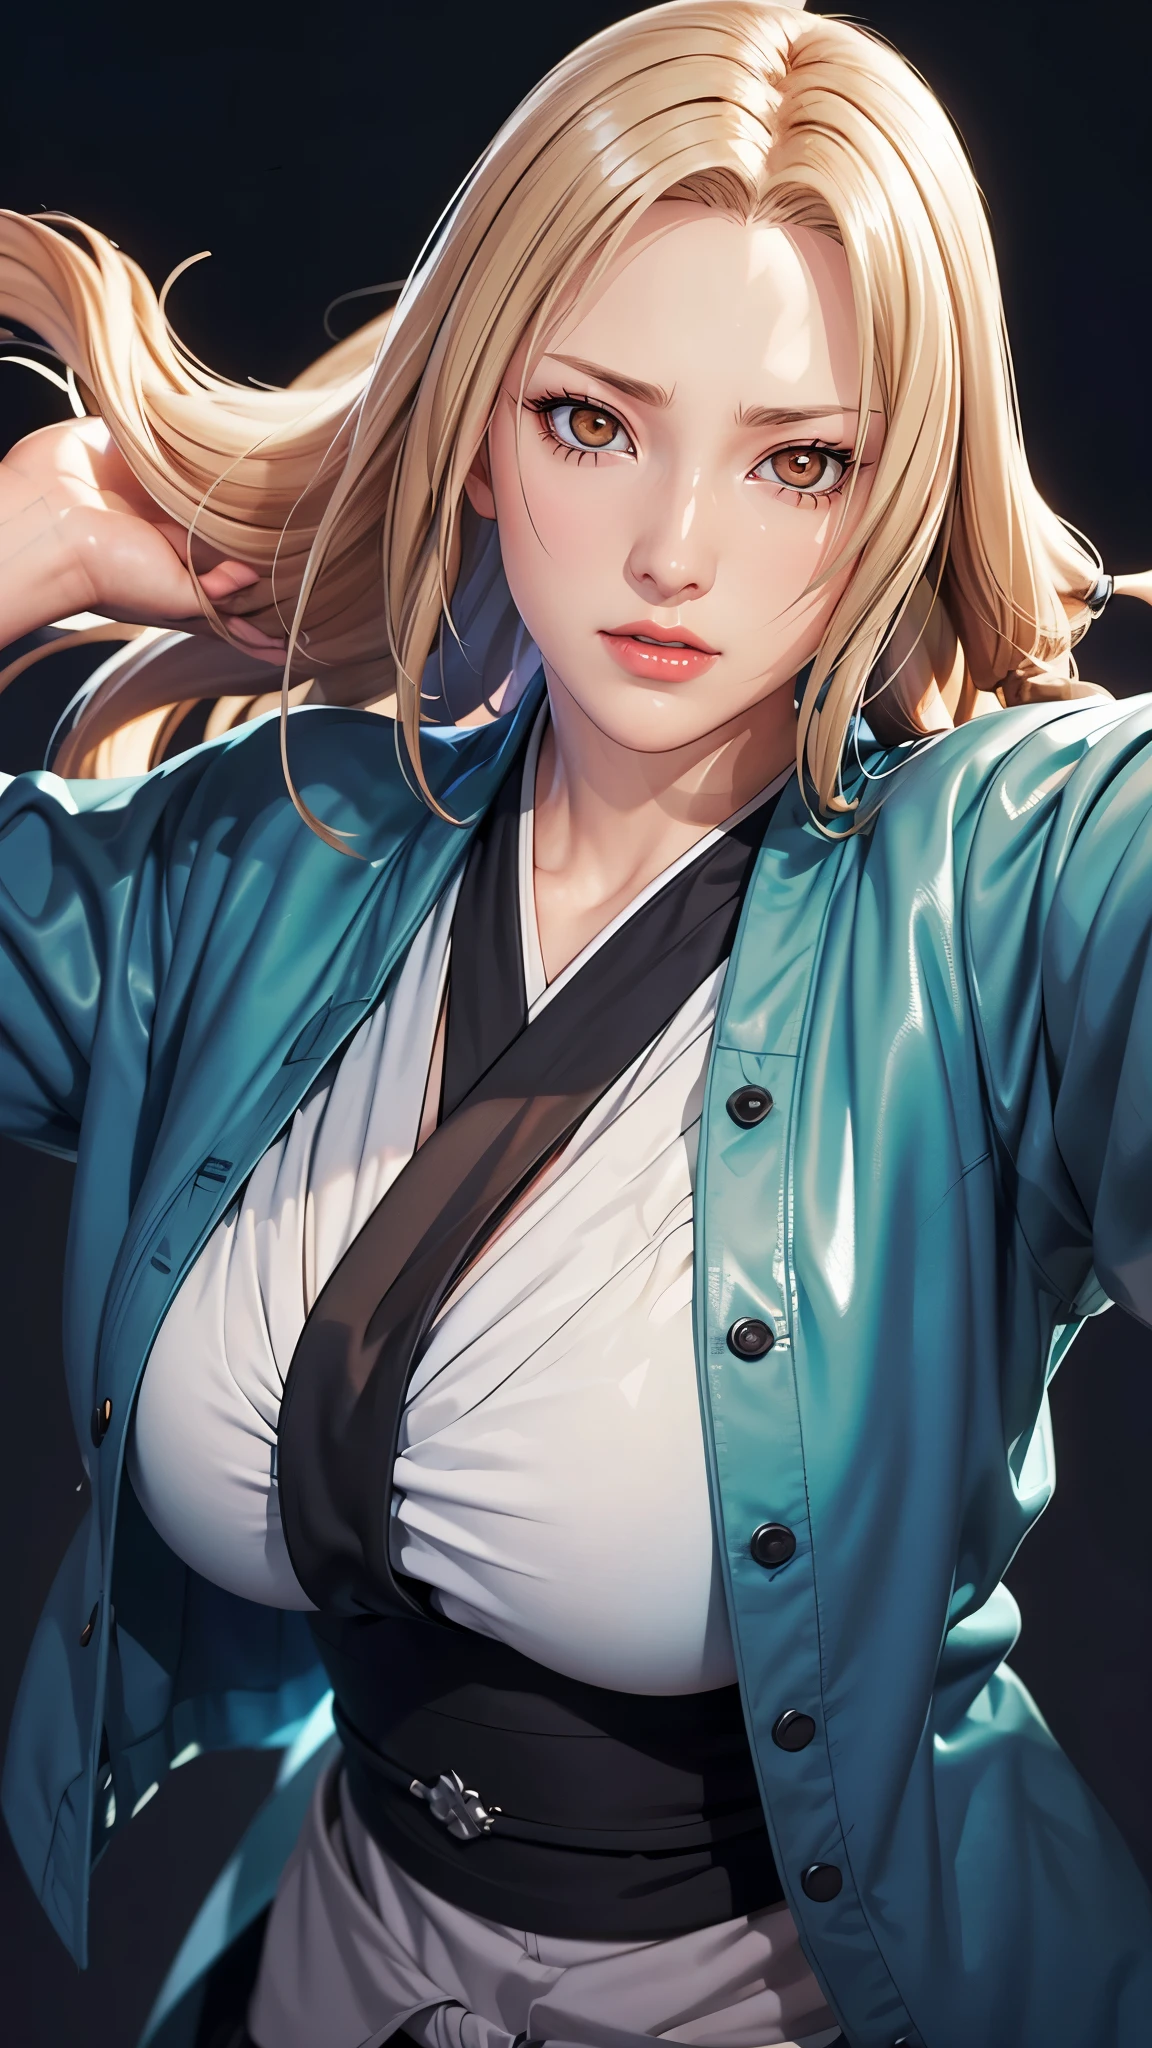 （（（Perfect figure，figure，独奏， White and tender skin，（（（cyberpunk，tsunade, Japanese clothes, sash, jacket，A tea green long jacket with black edges, black belt,  ））），（（（T5un4D3, Light yellow long hair, blue purple mark on forehead, light yellow thin short eyebrows, bright brown pupils, light red lipasterpiece)),high resolution, ((Best quality at best))，masterpiece，quality，Best quality，（（（ Exquisite facial features，Looking at the audience,There is light in the eyes，(（（Smile，confidence)））)，））），型figure:1.7））），（（（Light and shadow，Huge breasts））），（（（Looking at the camera，black background）））